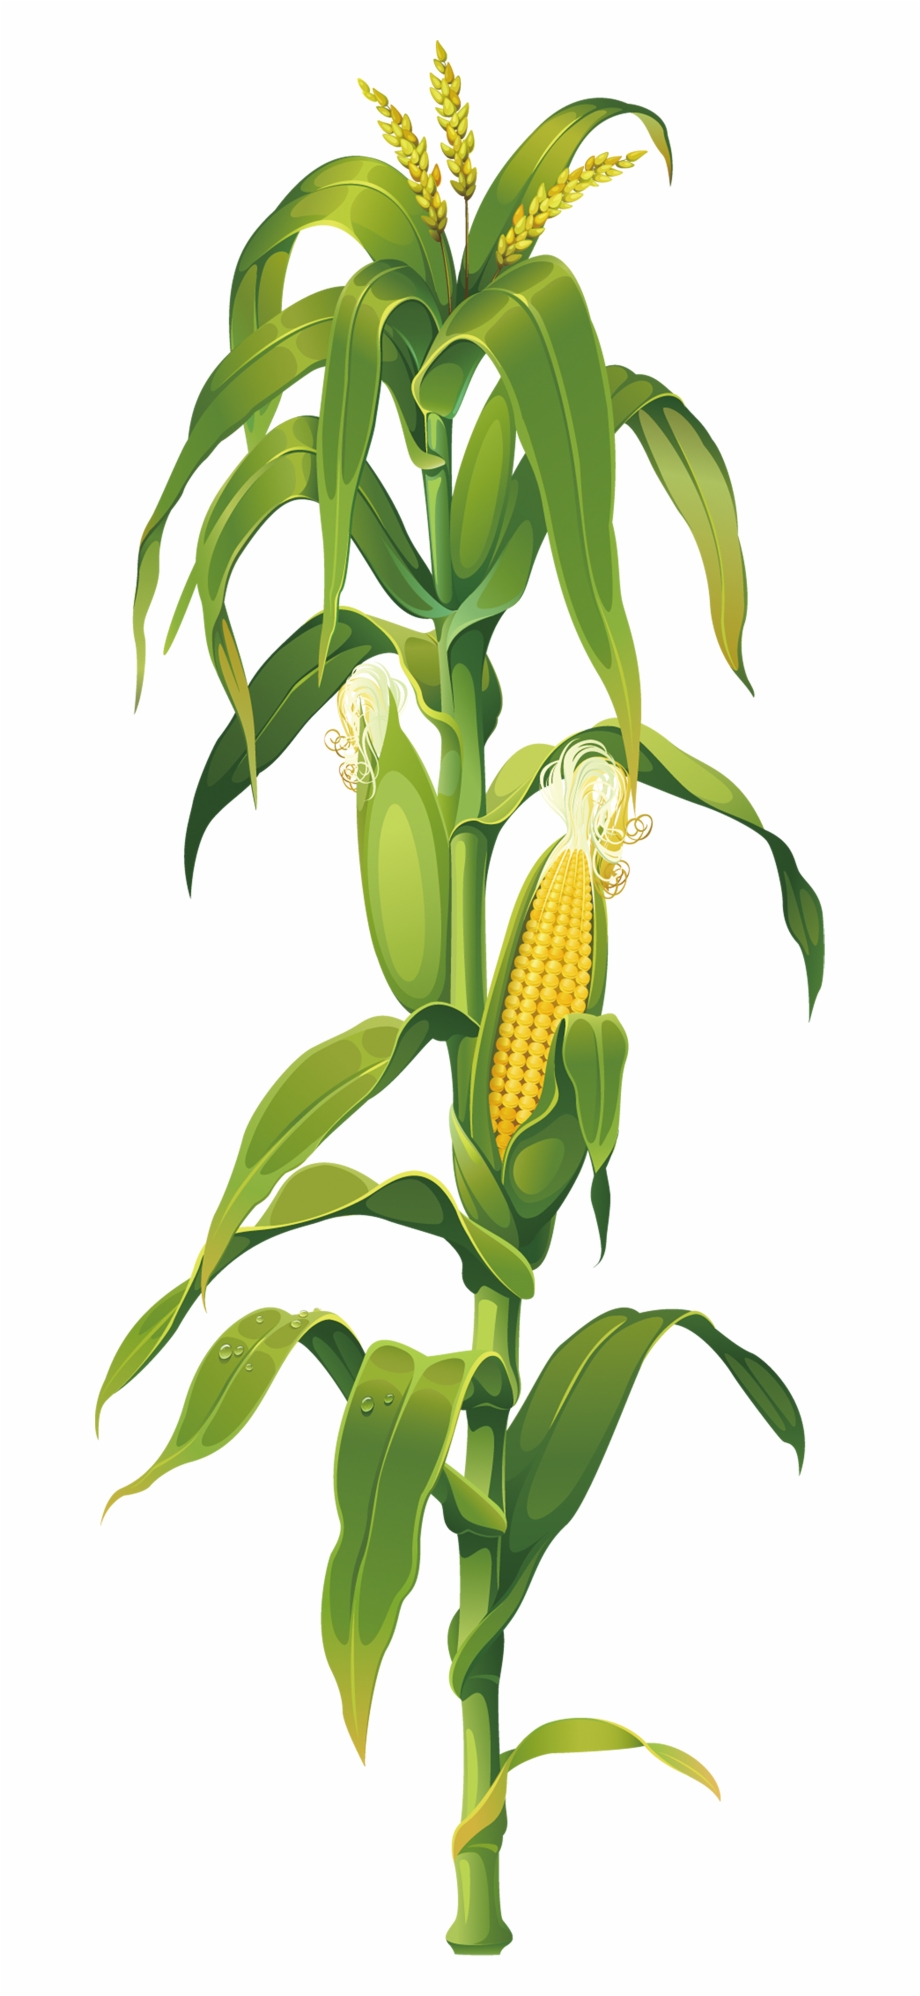 Maize Plant On Corn Cob The Drawing Clipart